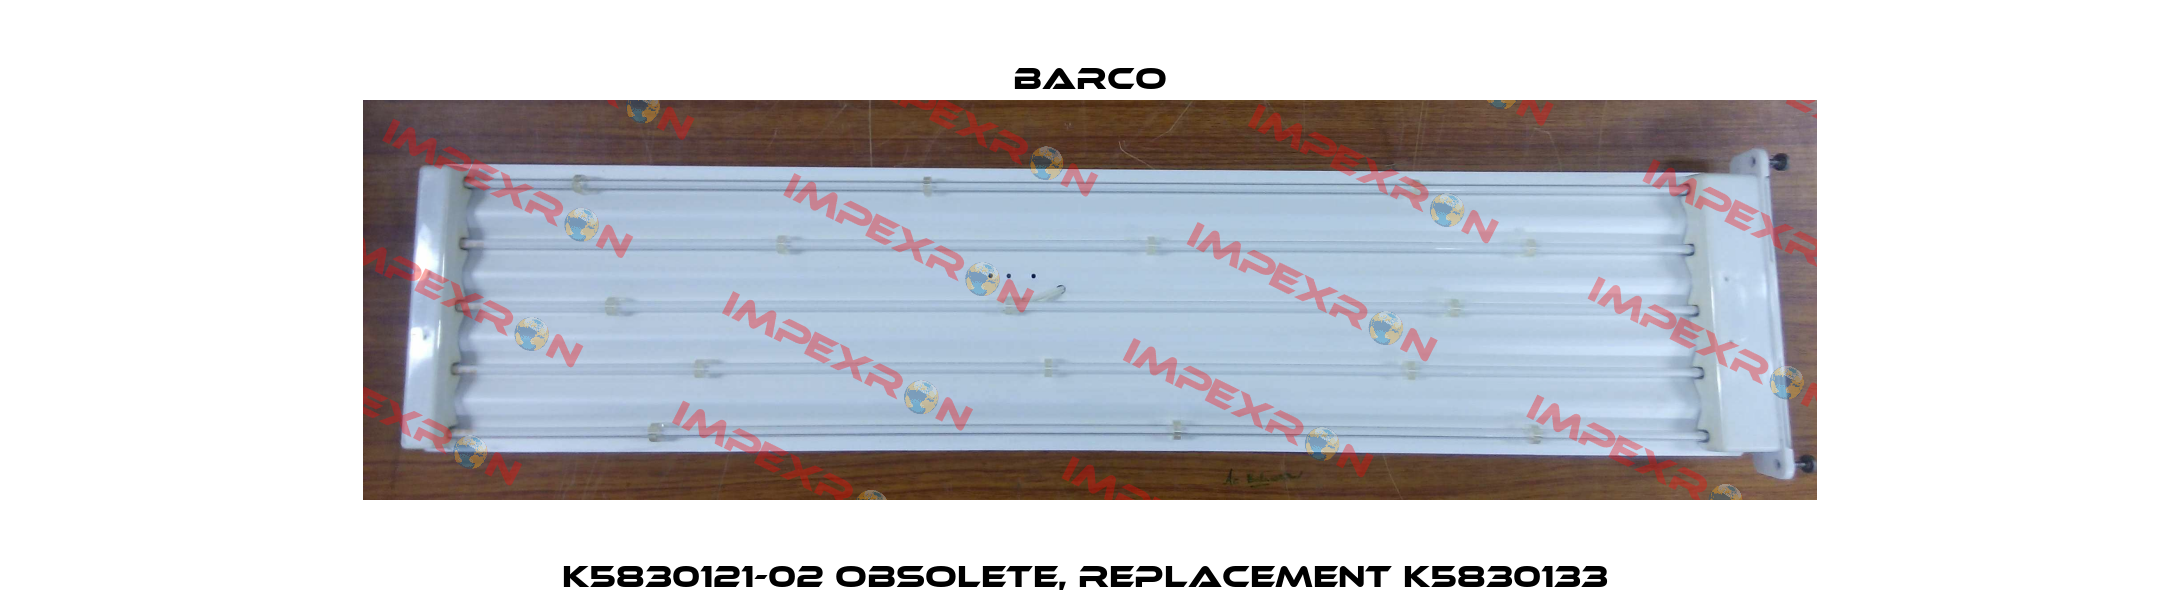 K5830121-02 obsolete, replacement K5830133  Barco